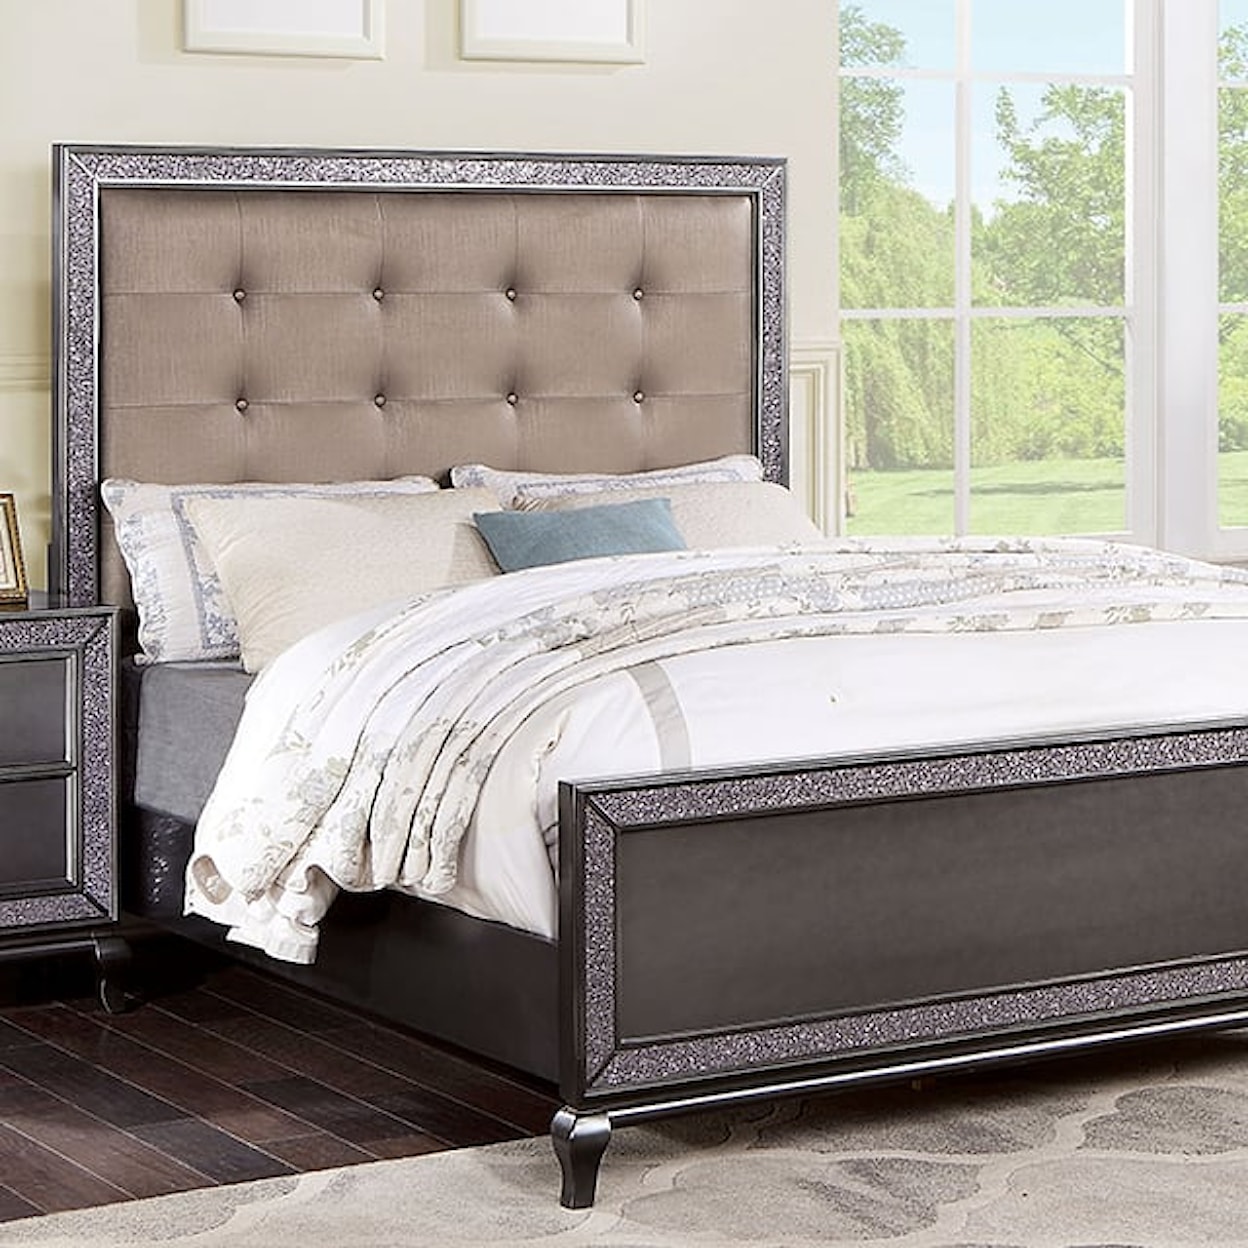 Furniture of America Onyxa Queen Upholstered Bed